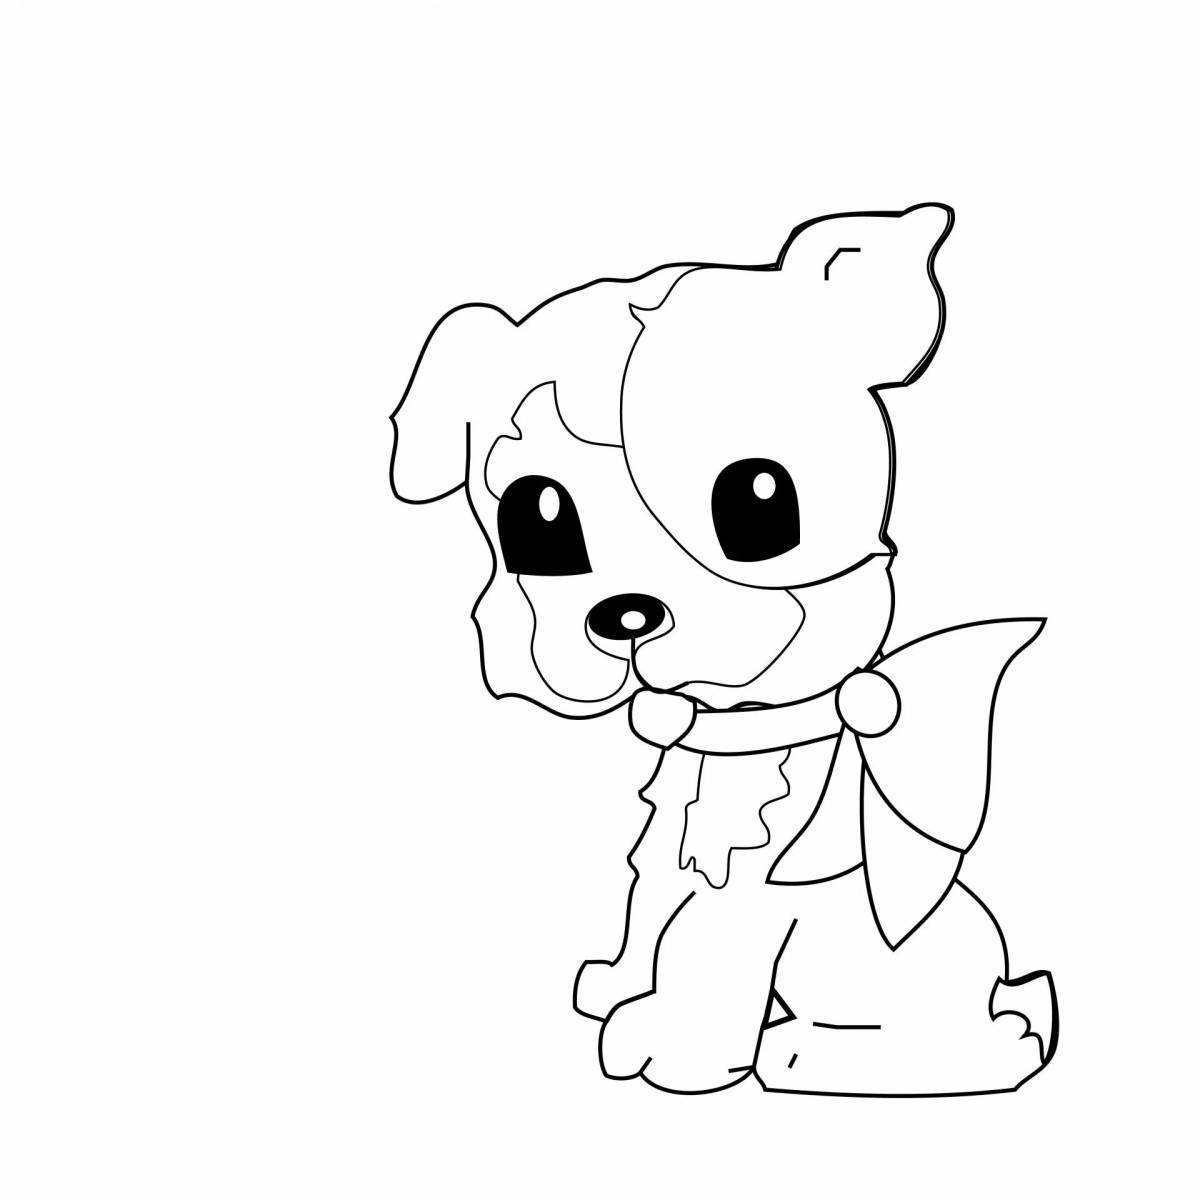 Tiny dog ​​coloring page